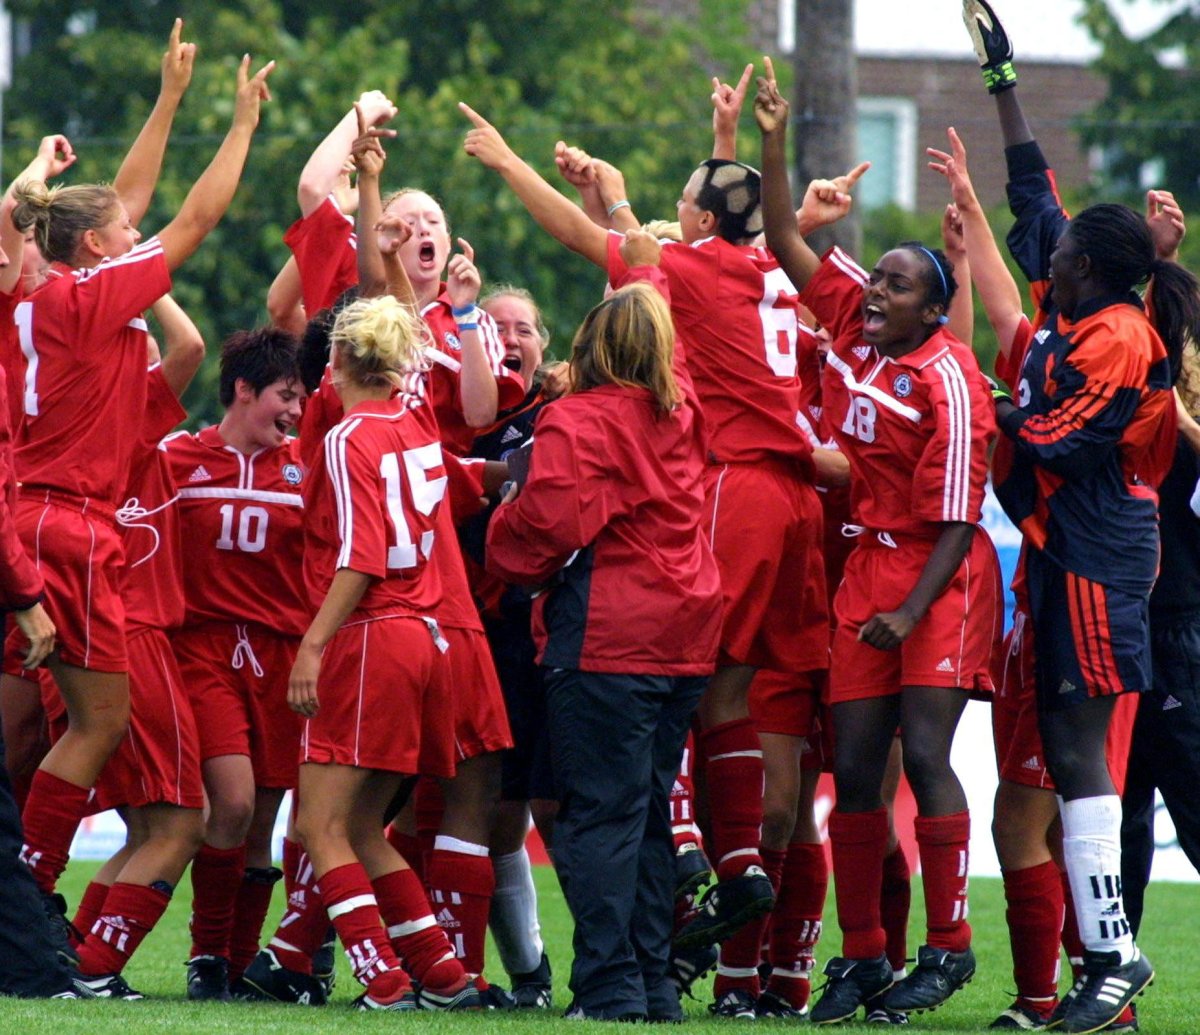 Ontario's female soccer team celebrate their gold medal at the 2001 Canada Summer Games in London.